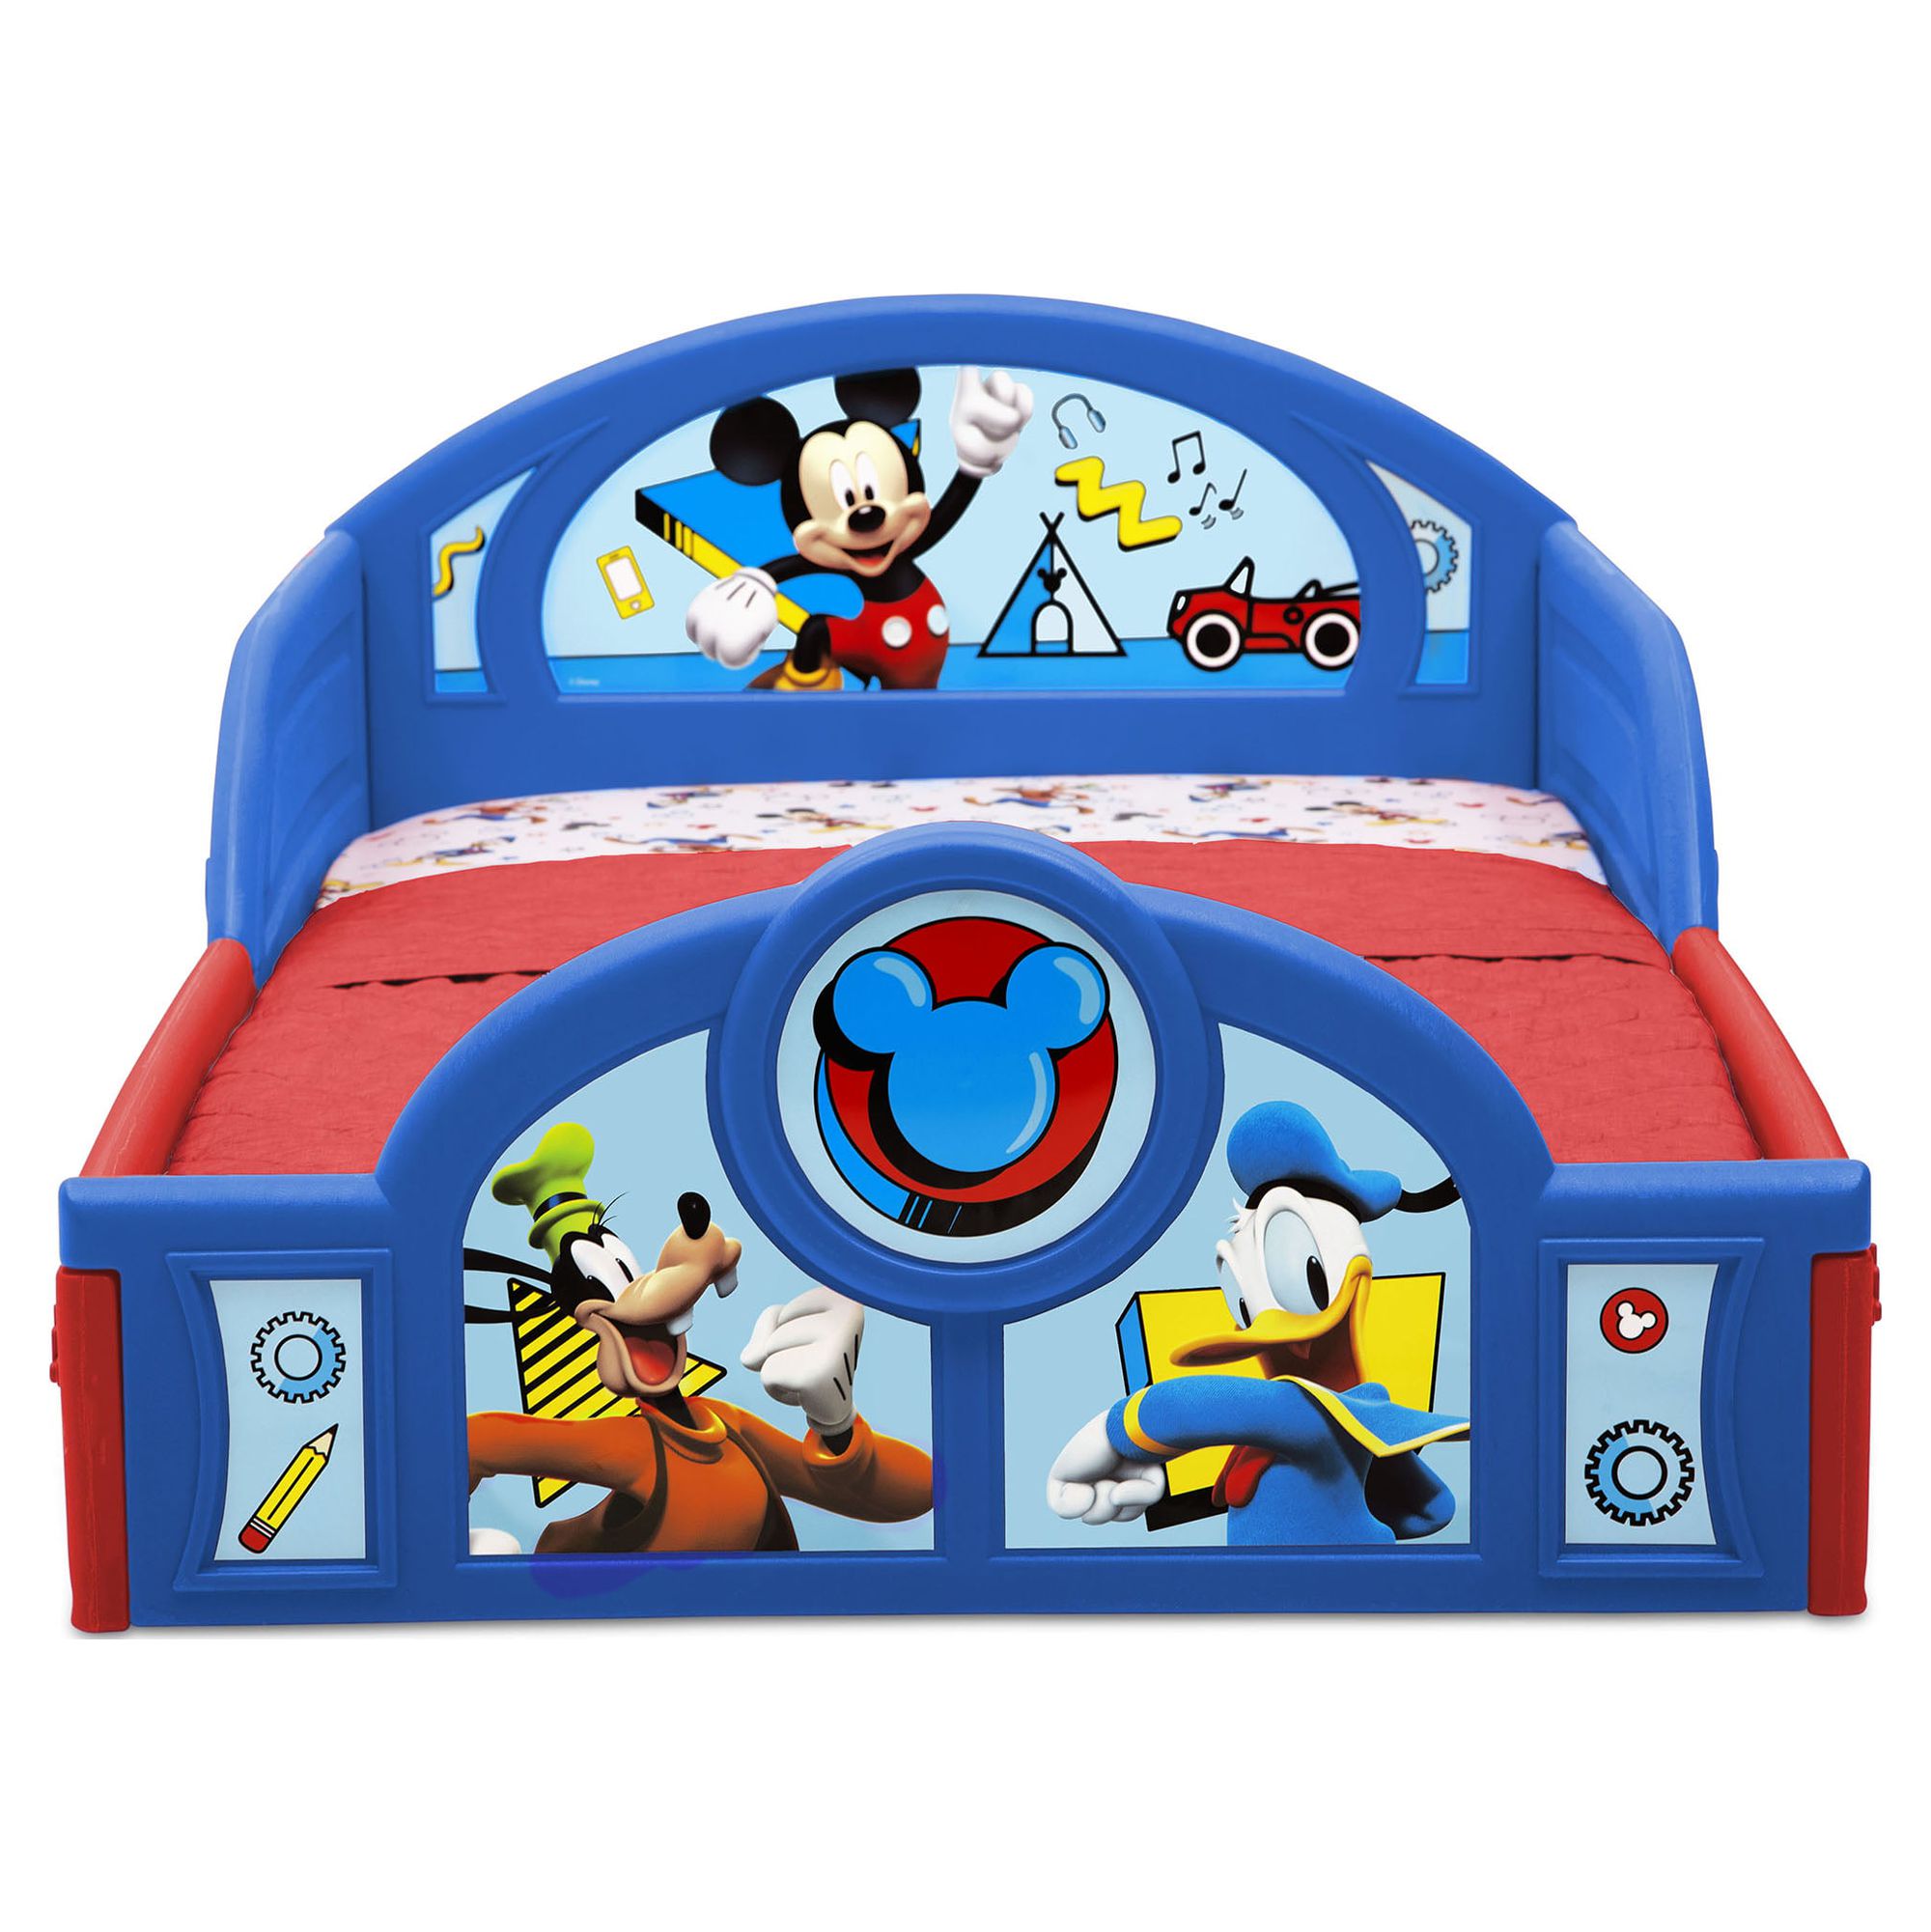 Disney Mickey Mouse 4-Piece Room-in-a-Box - Toddler Bedroom Set - image 9 of 20